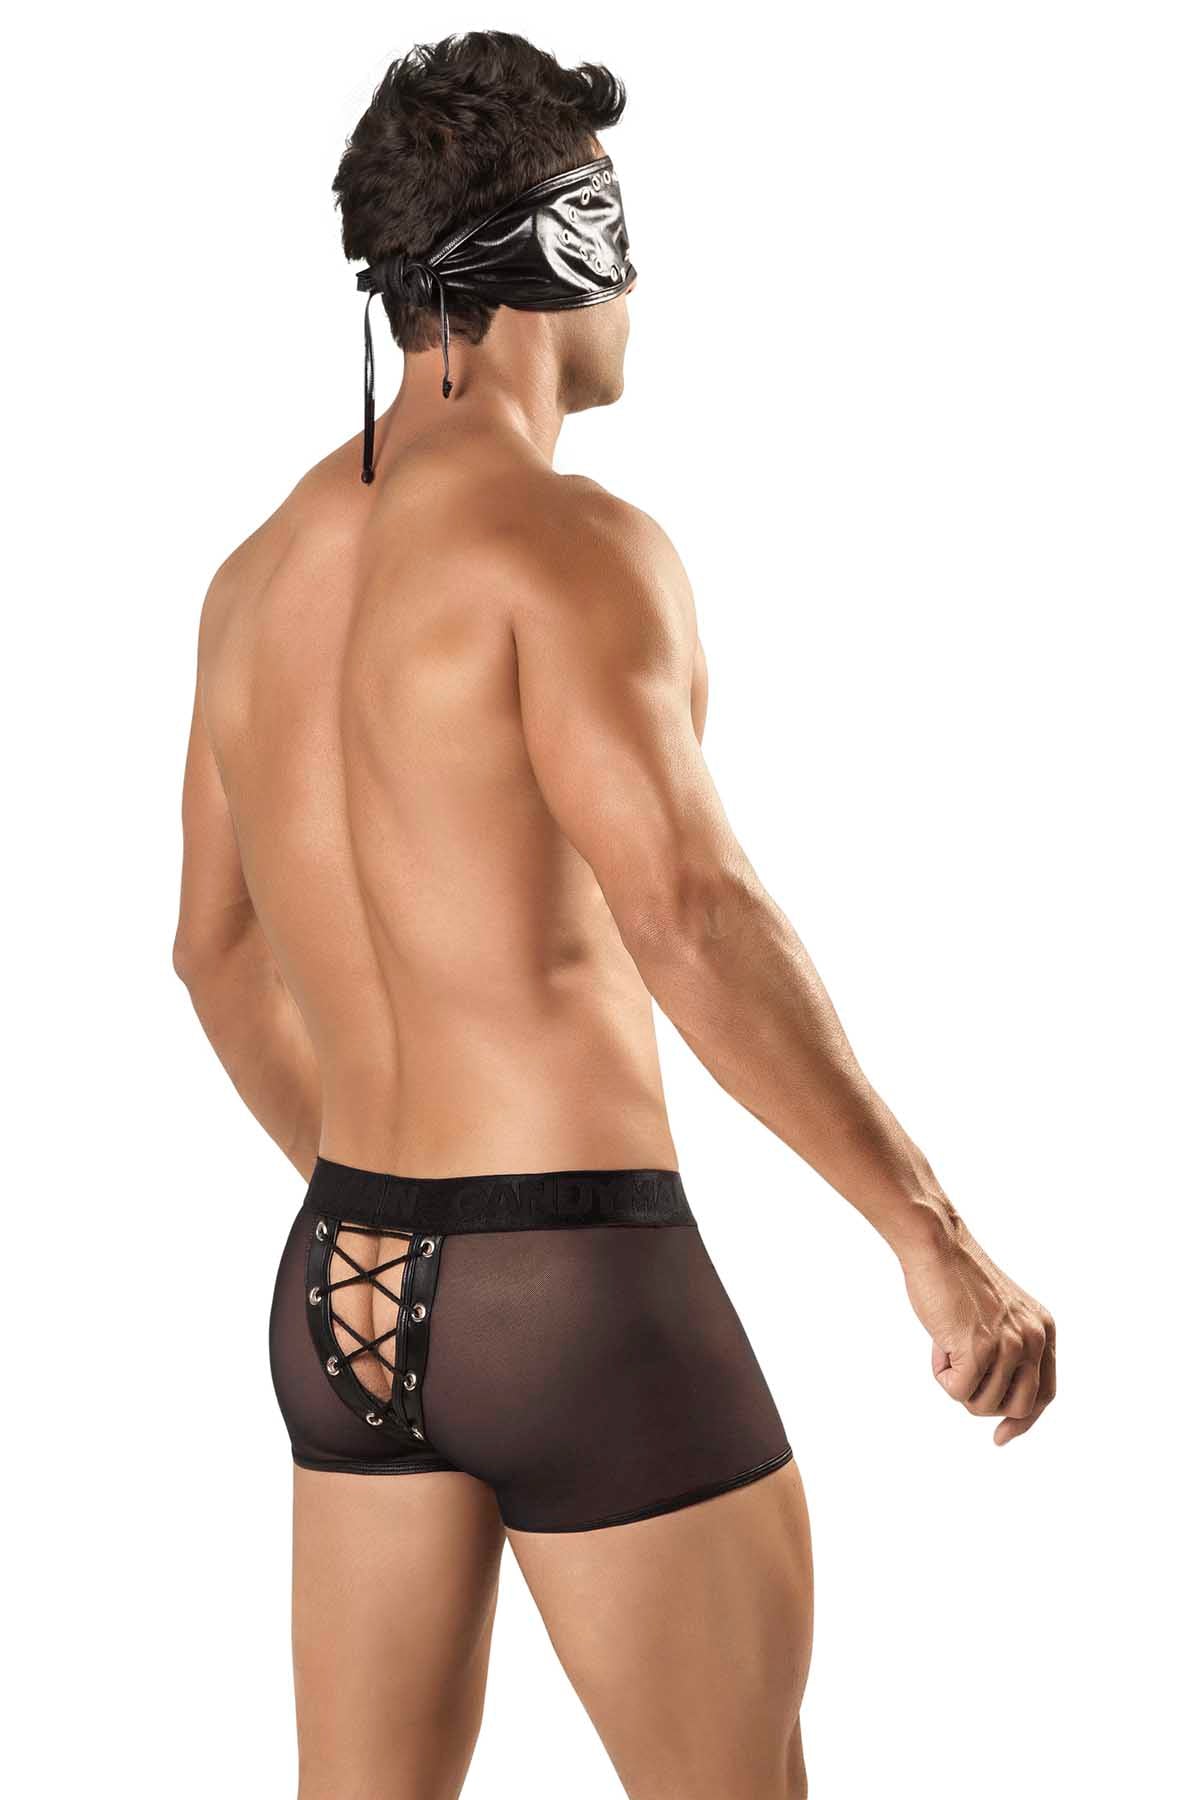 Candyman Blindfold Boxer Brief Costume